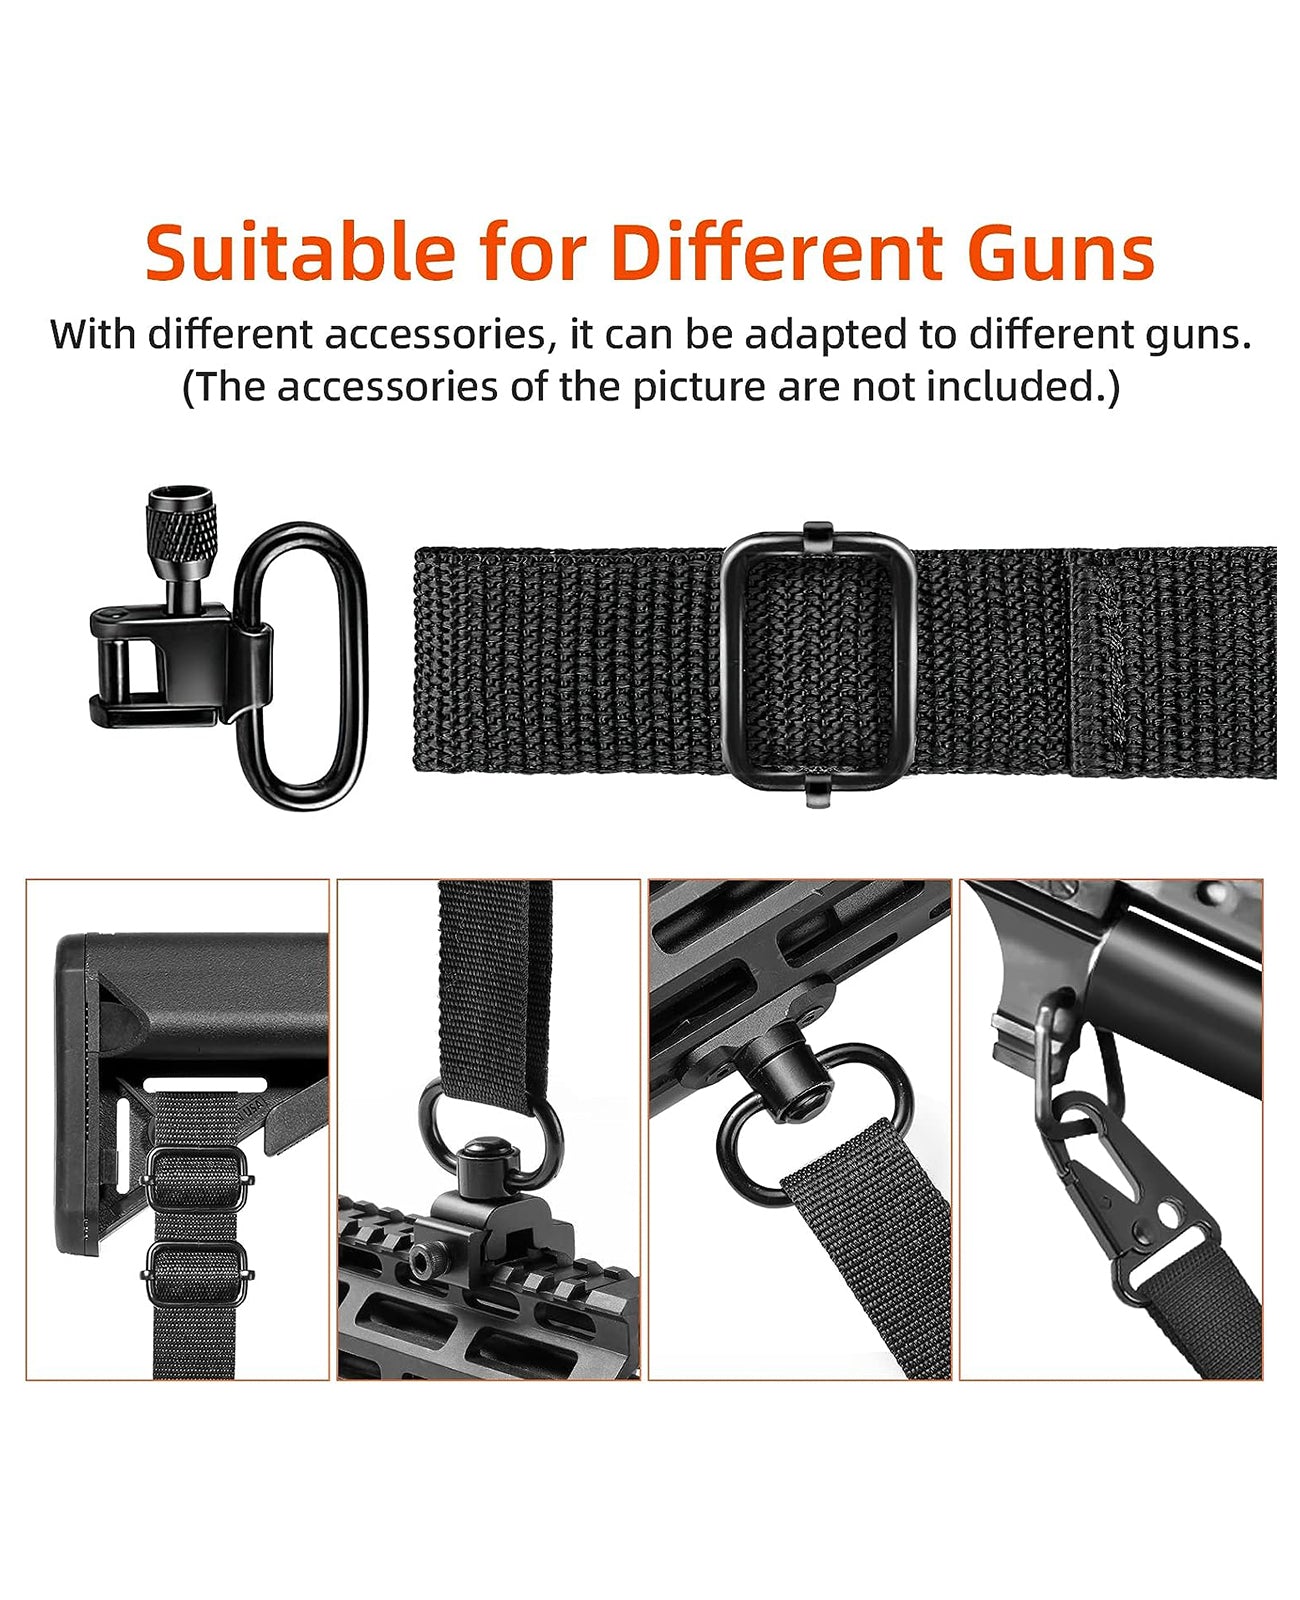 Durable Rifle Sling for Different Guns